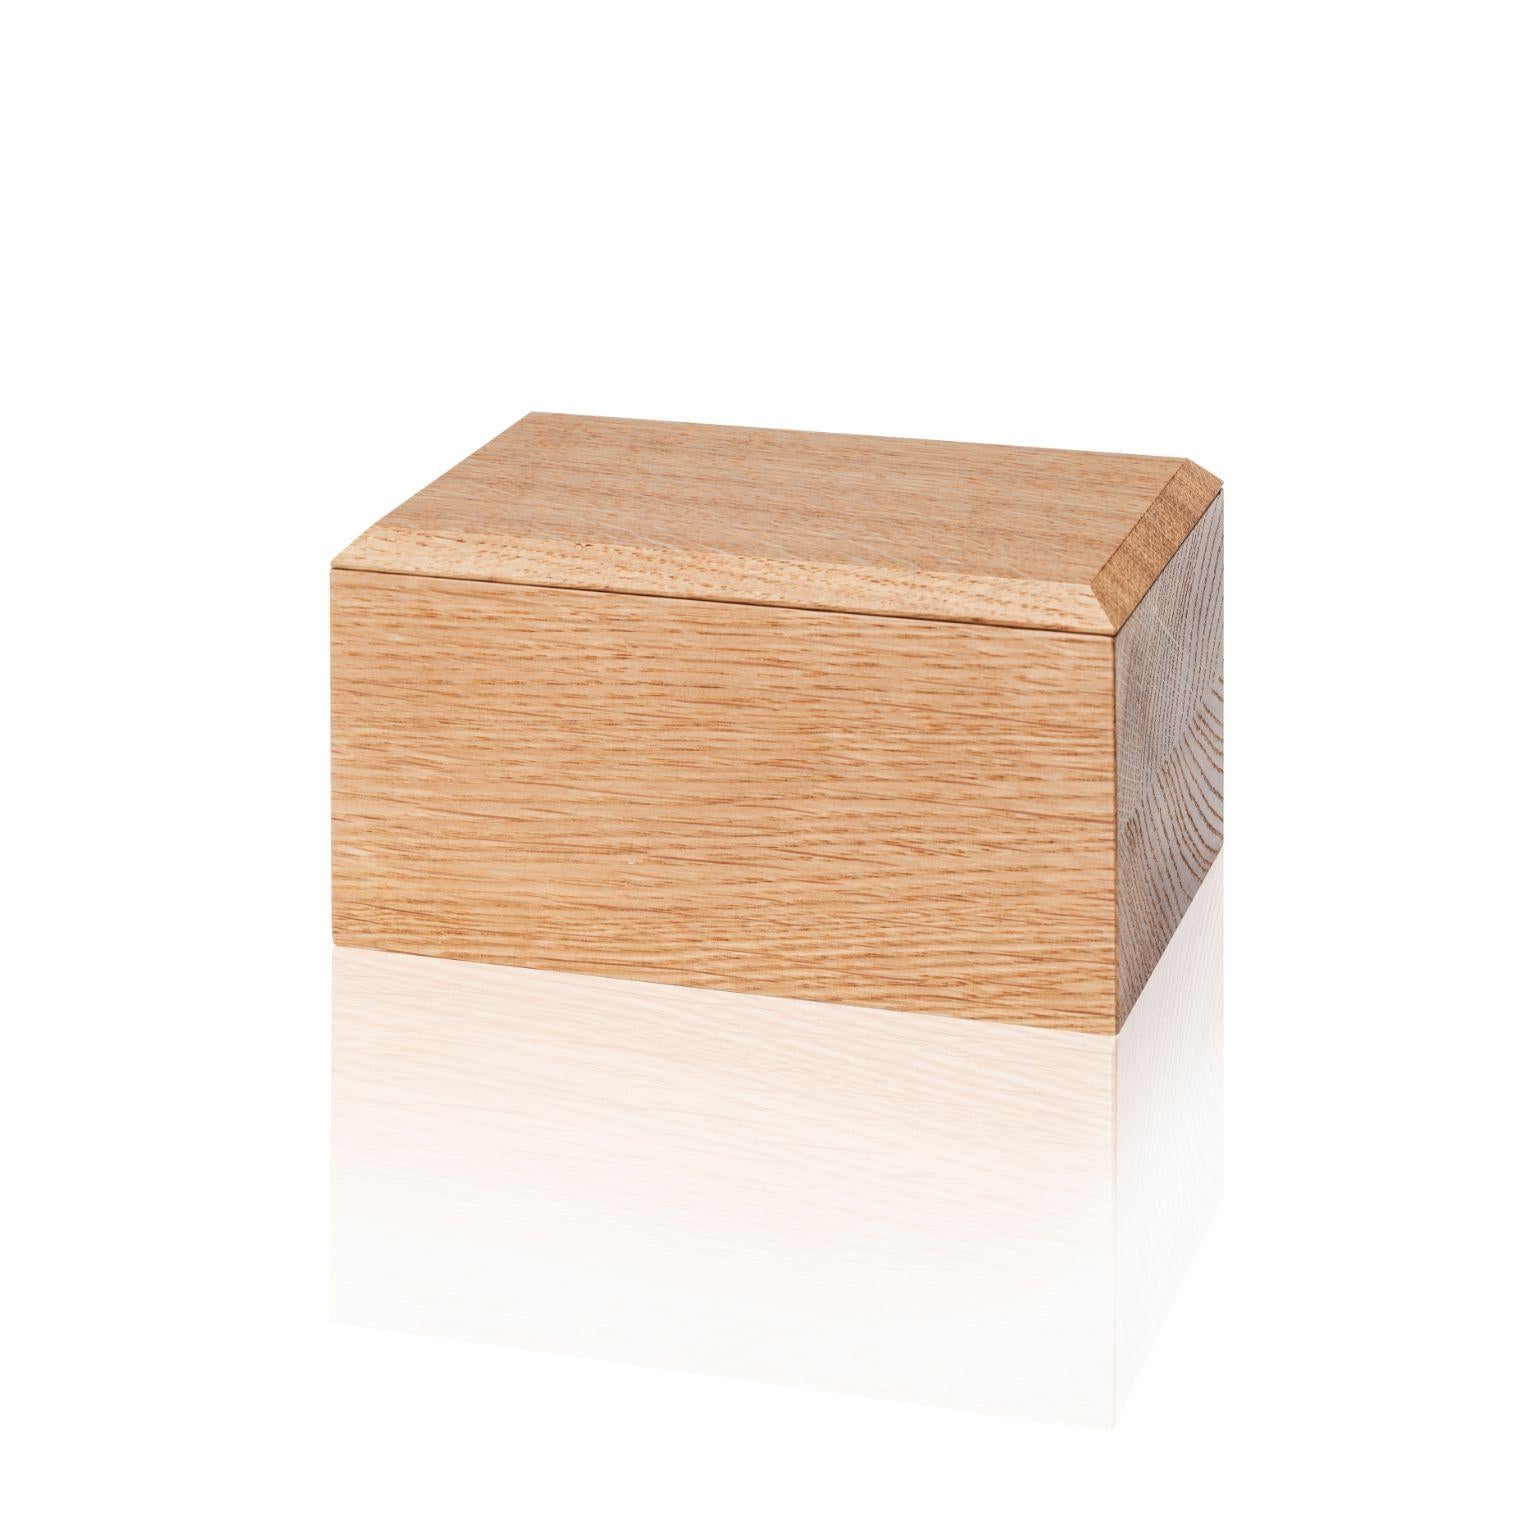 Pino Boxes - Butter by Antrei Hartikainen
Materials: Oak, Natural Oil Wax
Dimensions: W 18 / 14, D 9, H 5 / 7cm

A set of three vertical and two horizontal stacking boxes constructed of vividly grained woods. The pino boxes may be arranged in